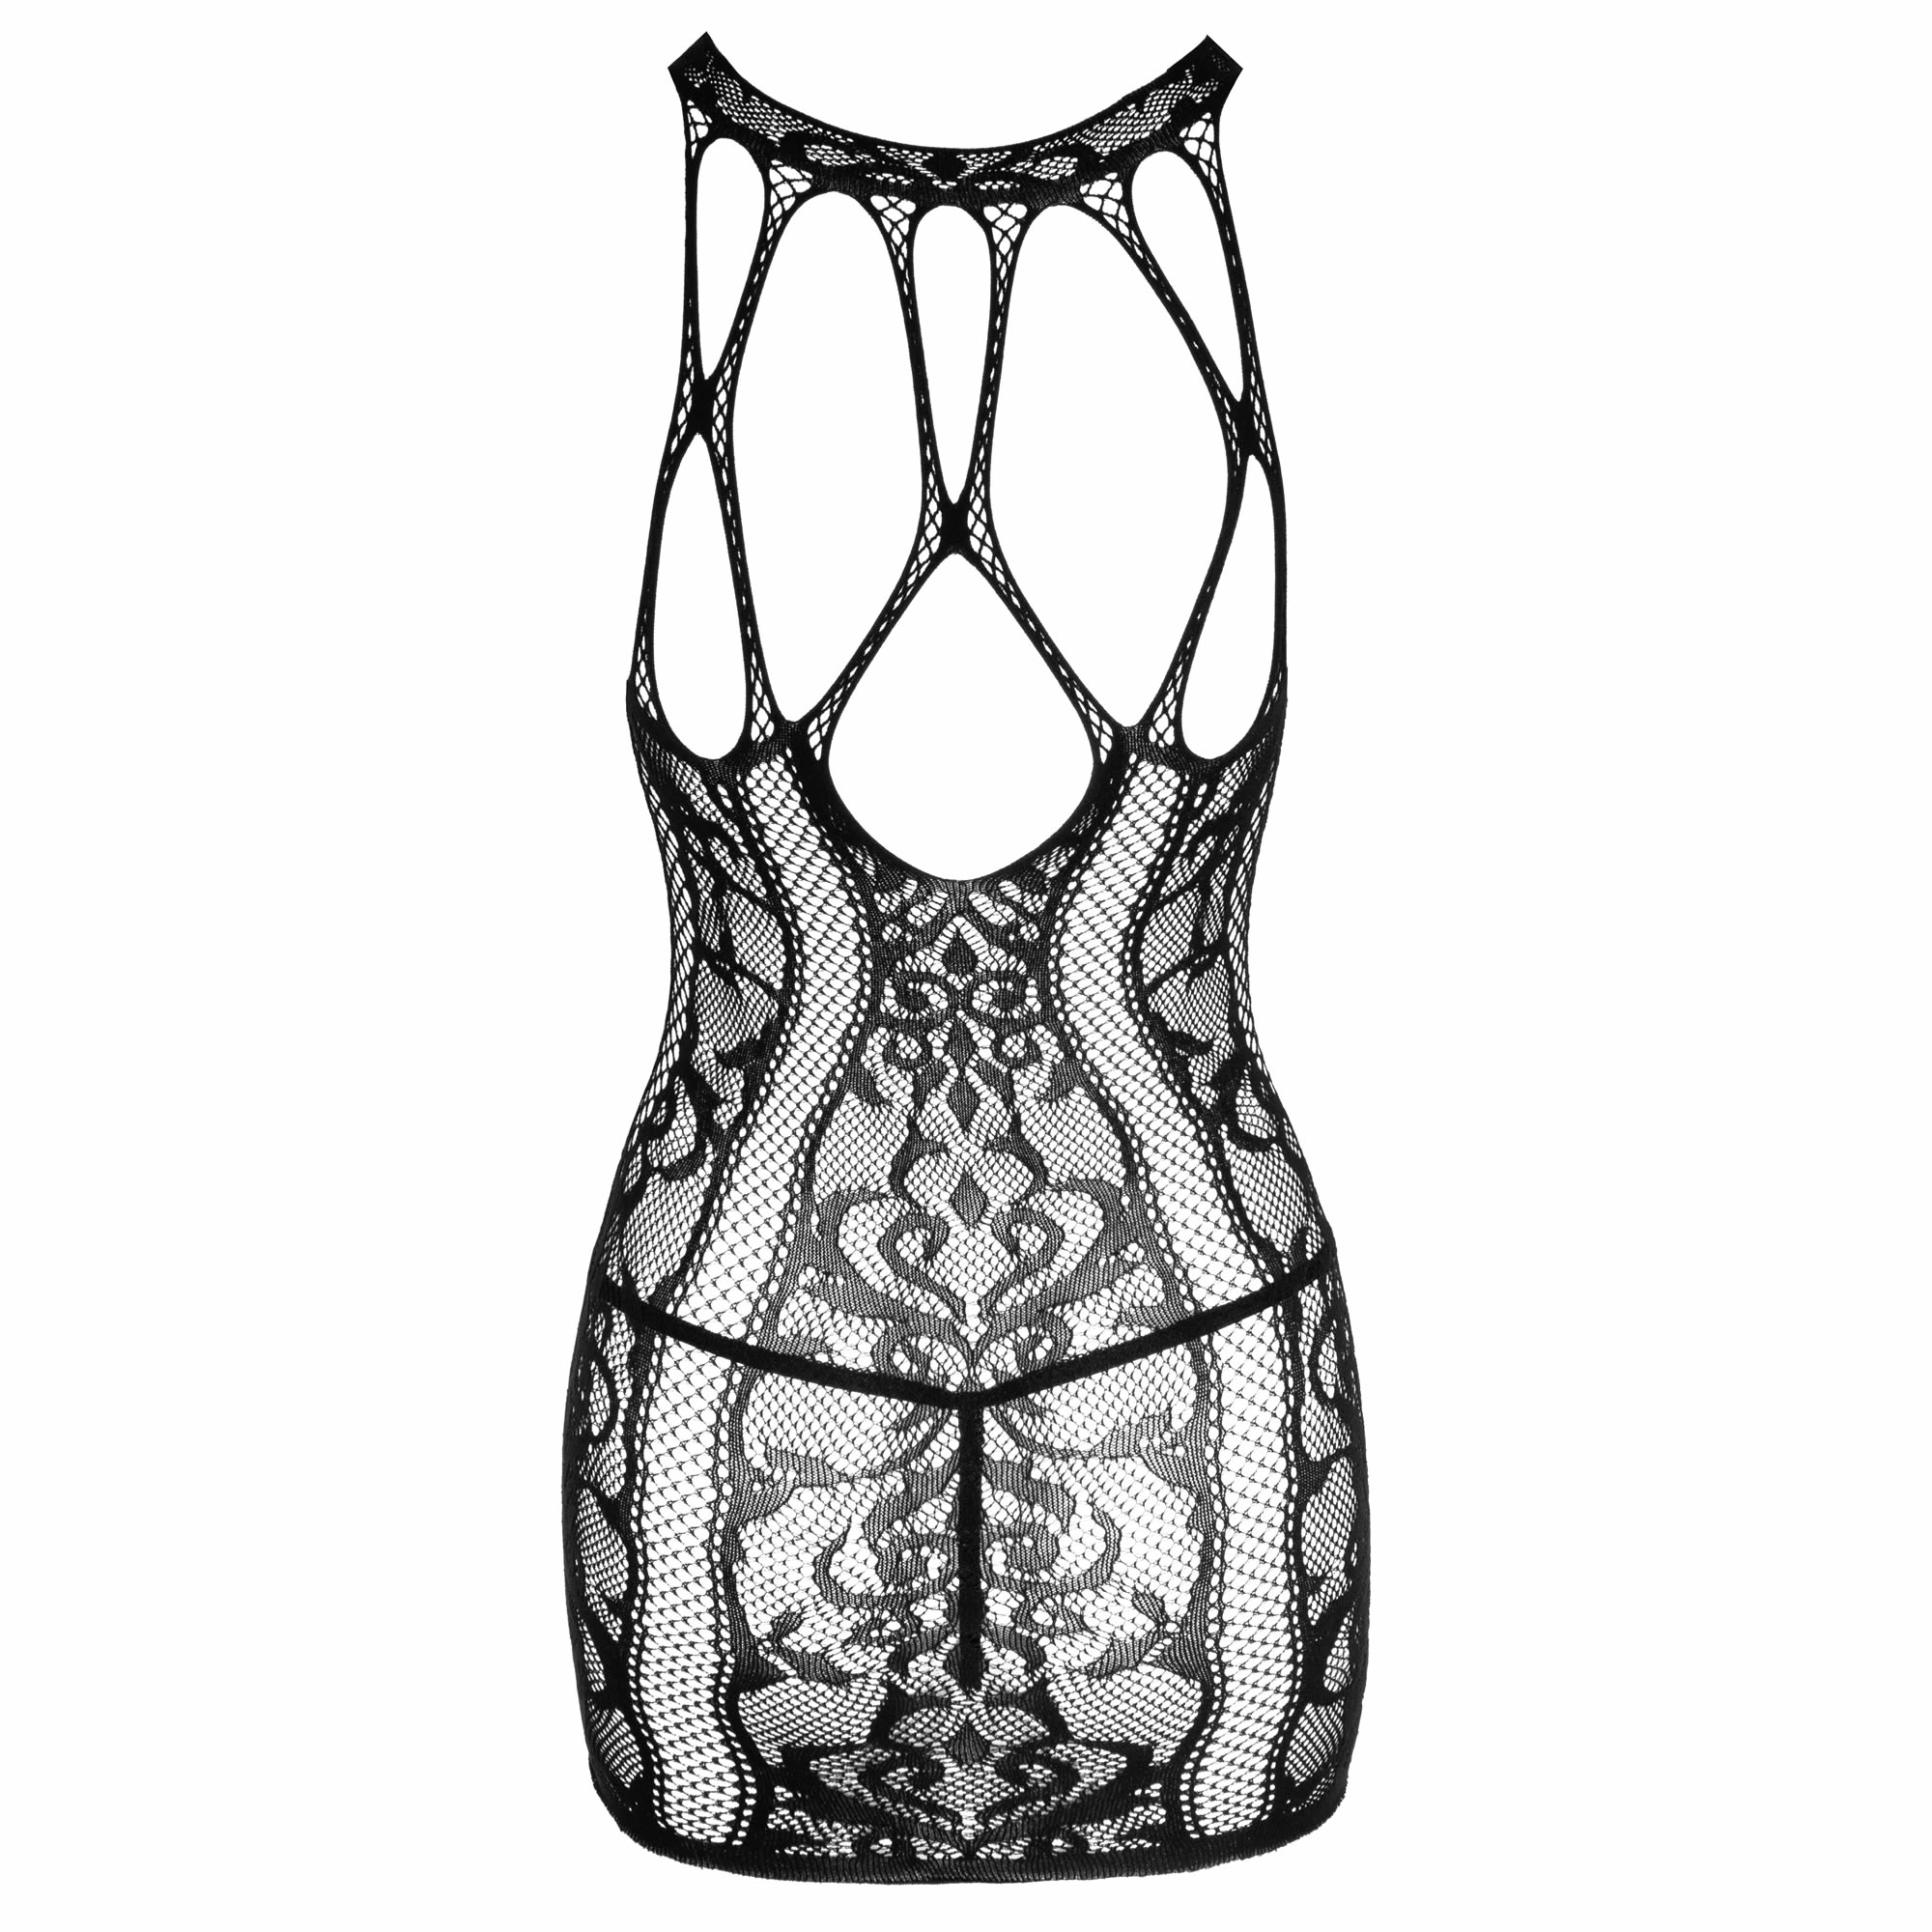 NO:XQSE Net Dress with Lace Look